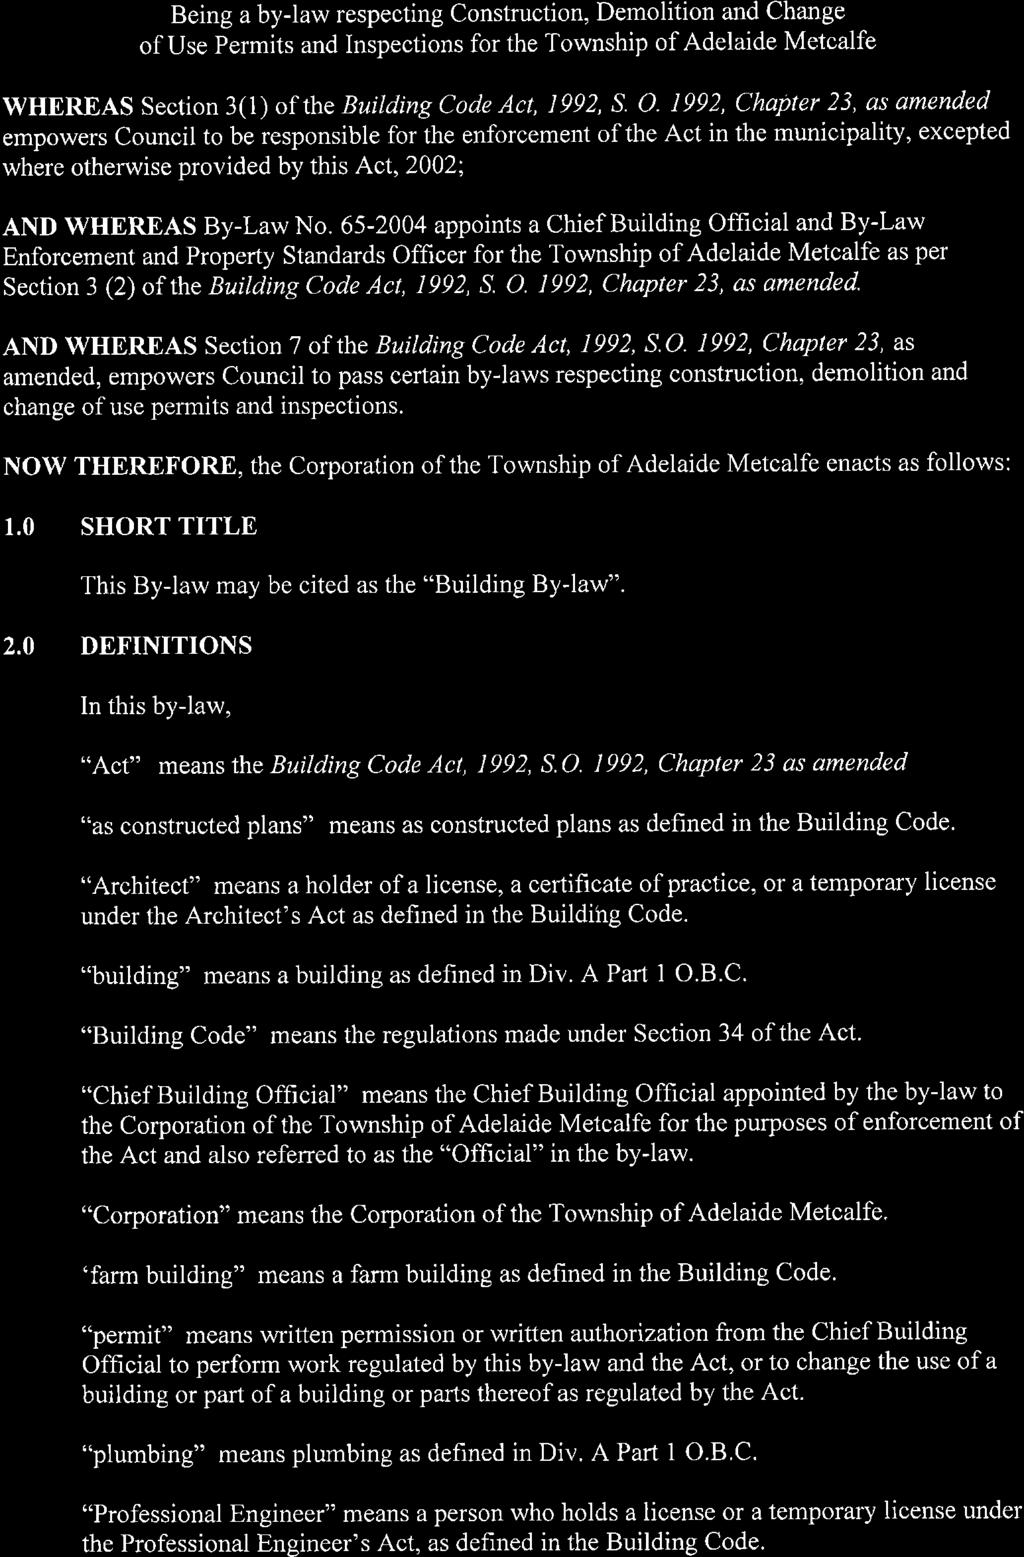 THE CORPORATION OF THE TOWNSHIPSHIP OF ADELAIDE METCALFE BY-LAW #69-2011 Being a by-law respecting Construction, Demolition and Change of Use Permits and Inspections for the Township of Adelaide